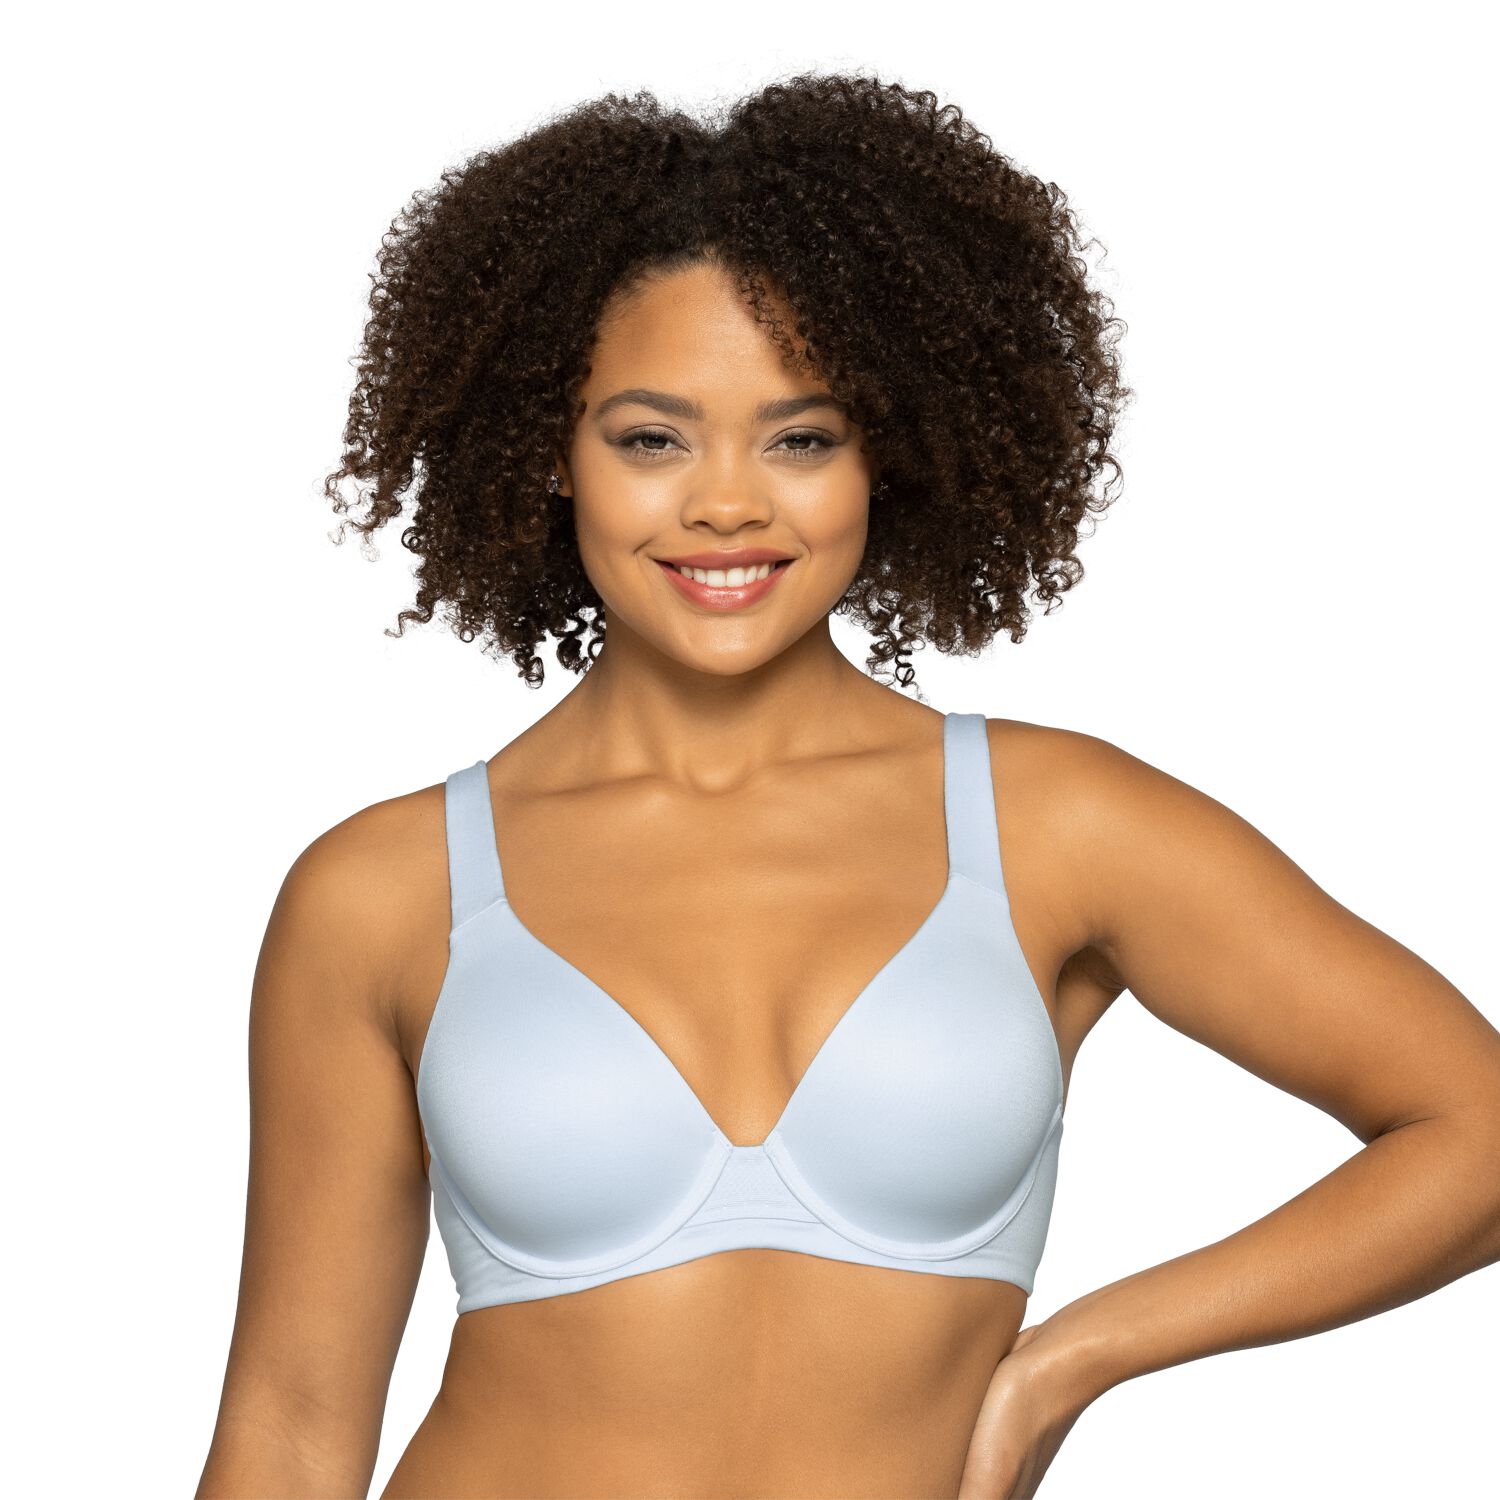 38b White Minimiser Bra - Get Best Price from Manufacturers & Suppliers in  India